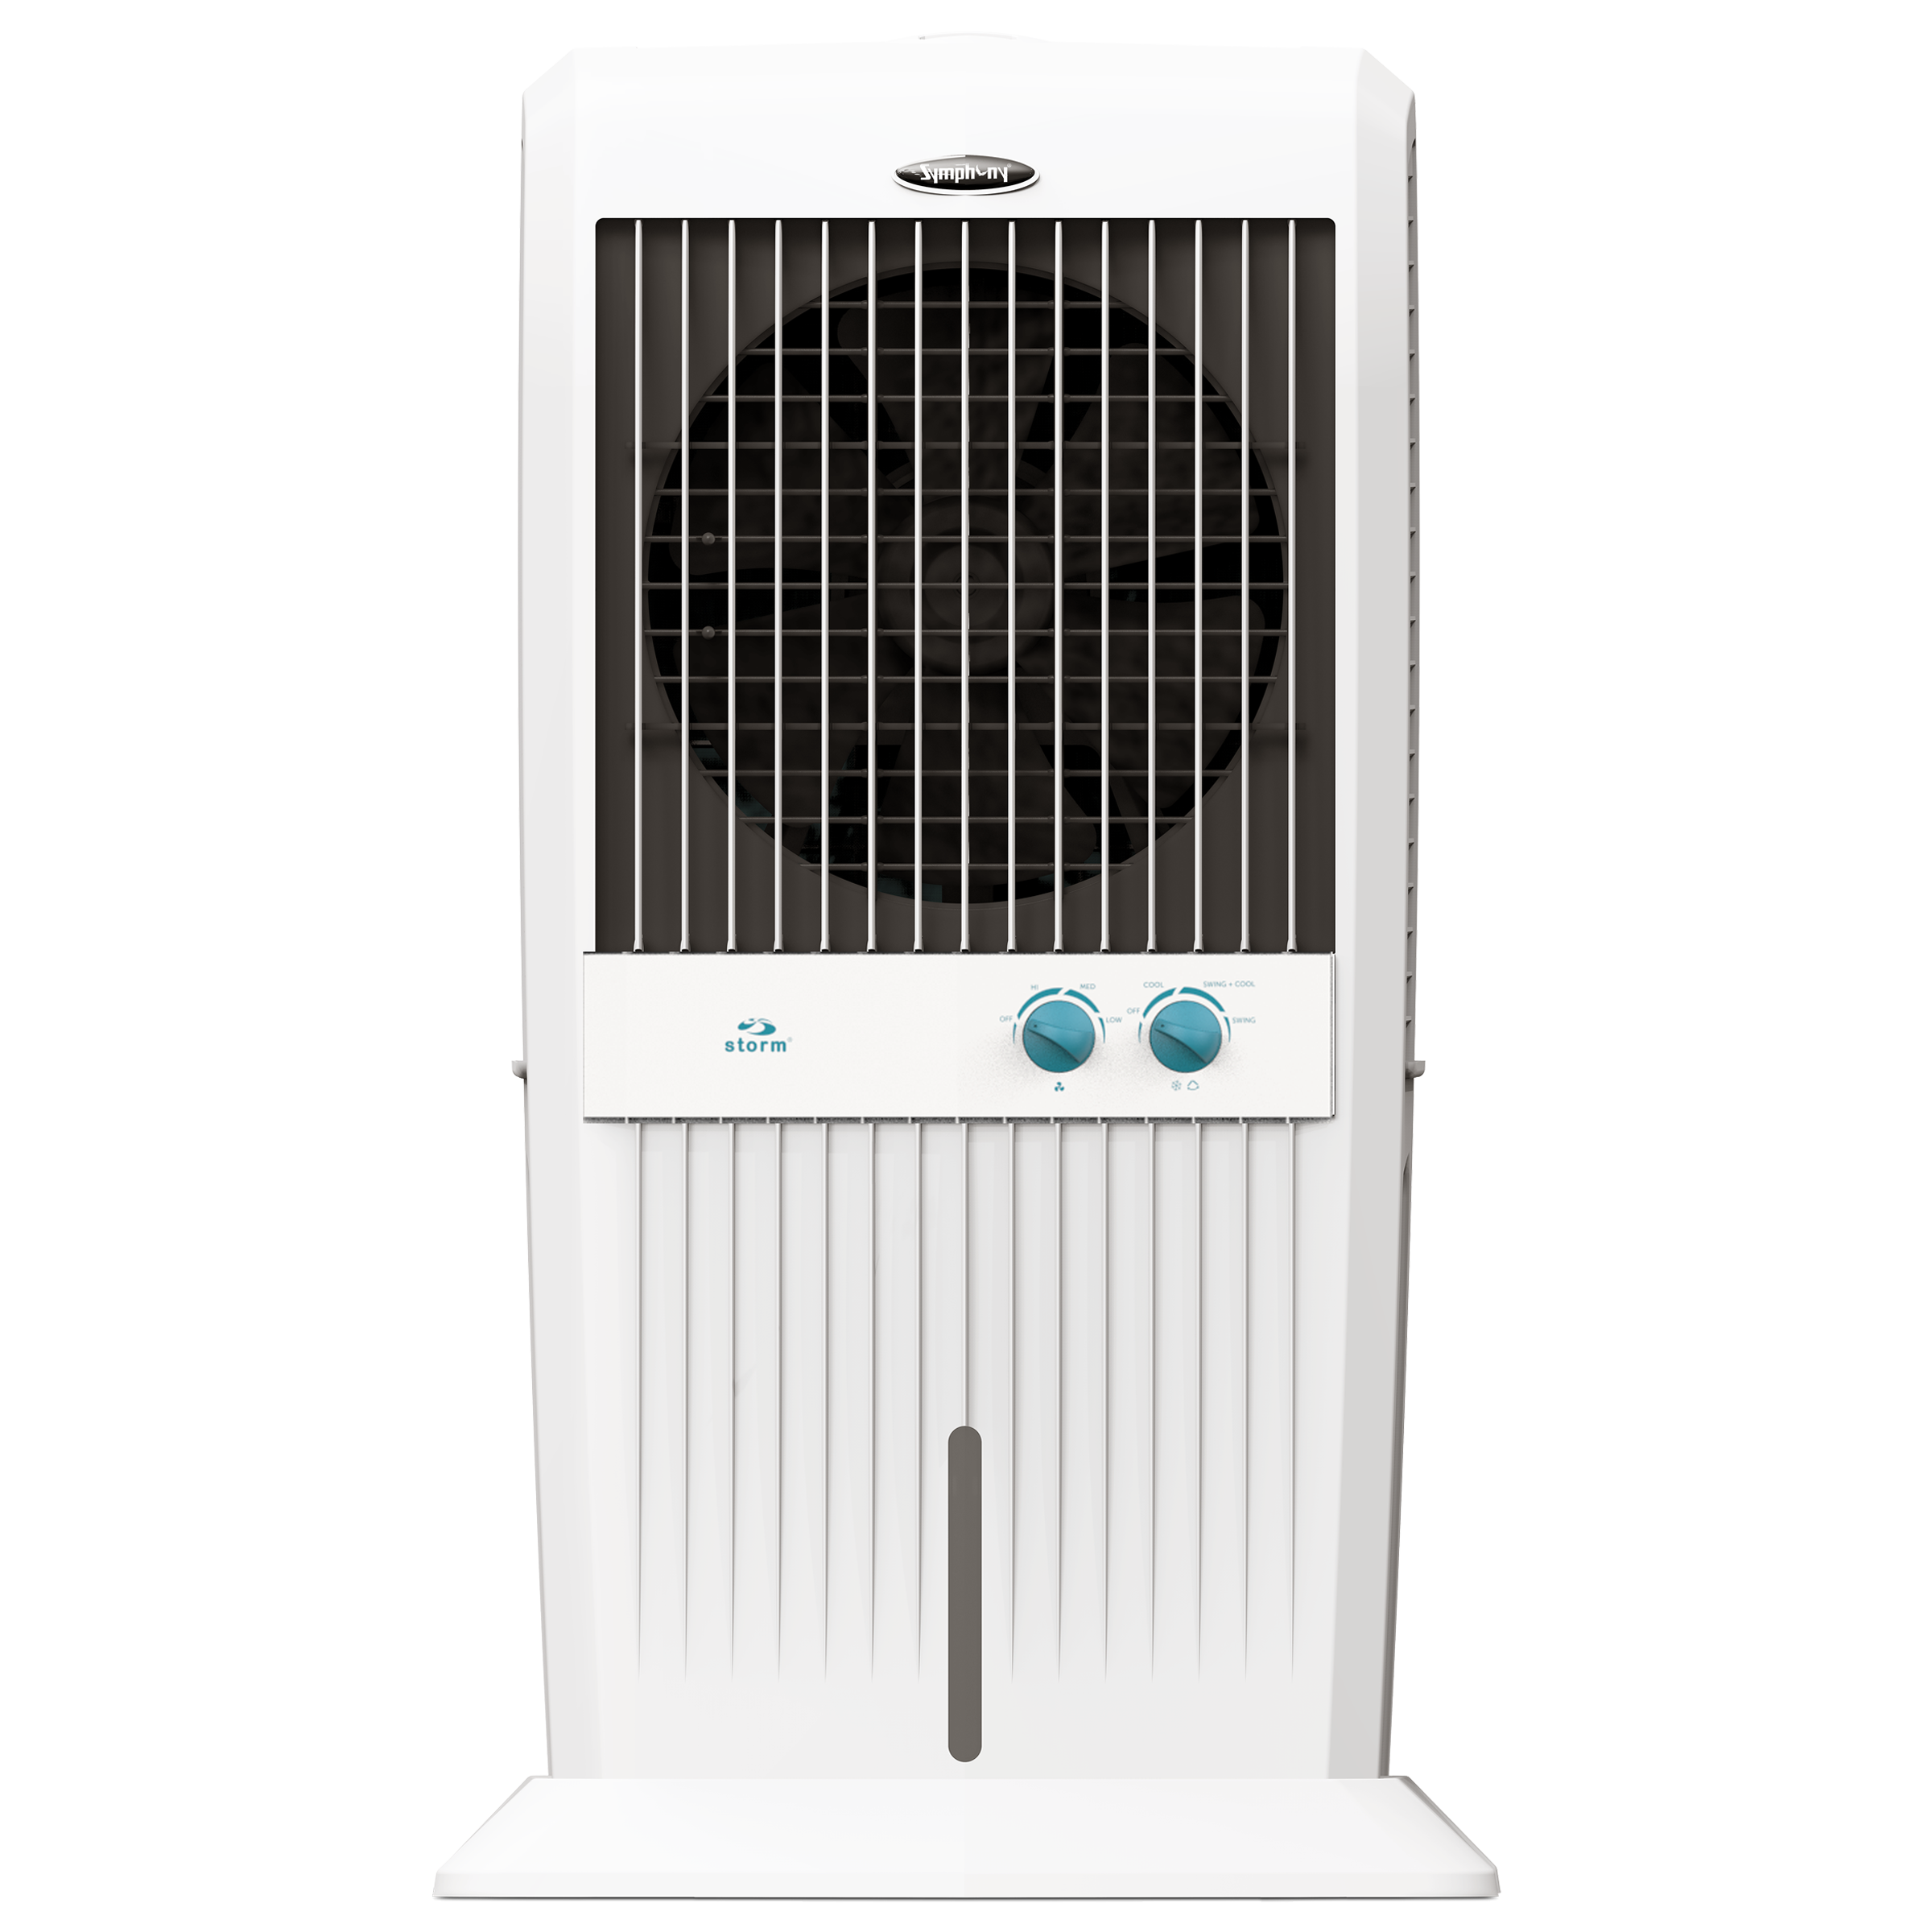 Symphony Storm 70 XL 70 Litres Desert Air Cooler with i-Pure Technology (Cool Flow Dispenser, White)